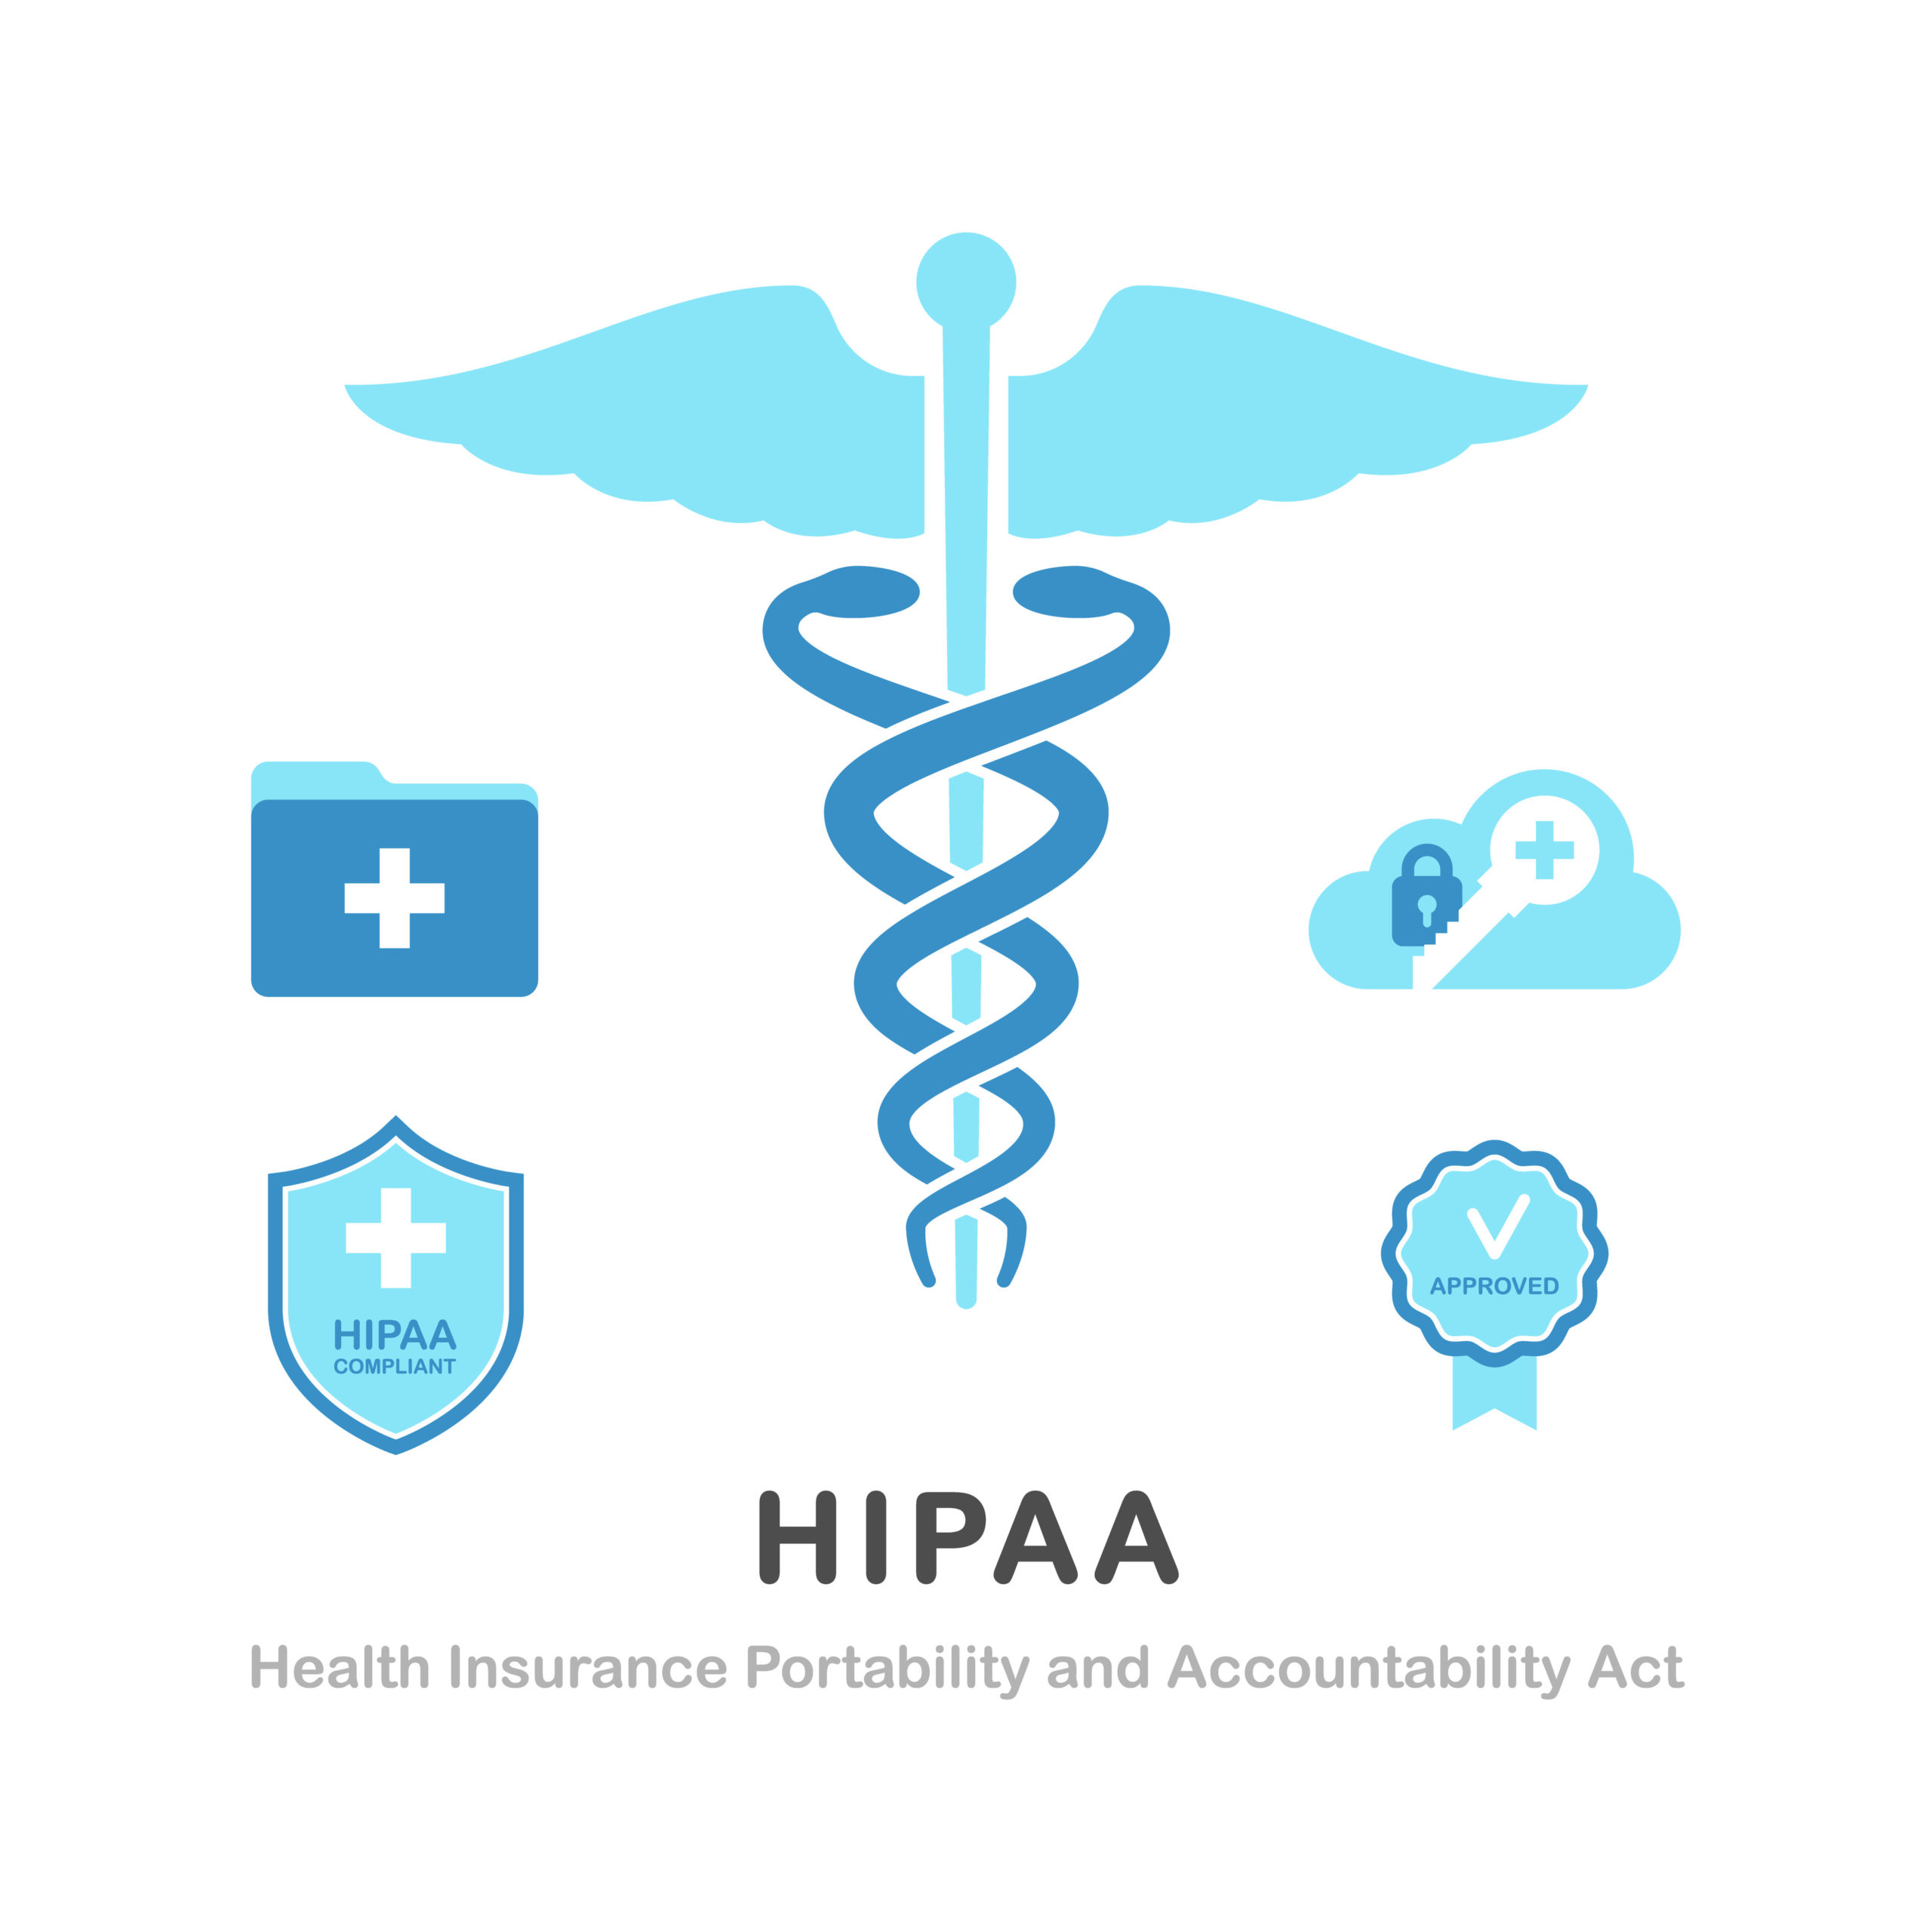 SouthIndus Labs has wide expericence in building software and mobile apps for healthcare domain that are HIPAA compliant.